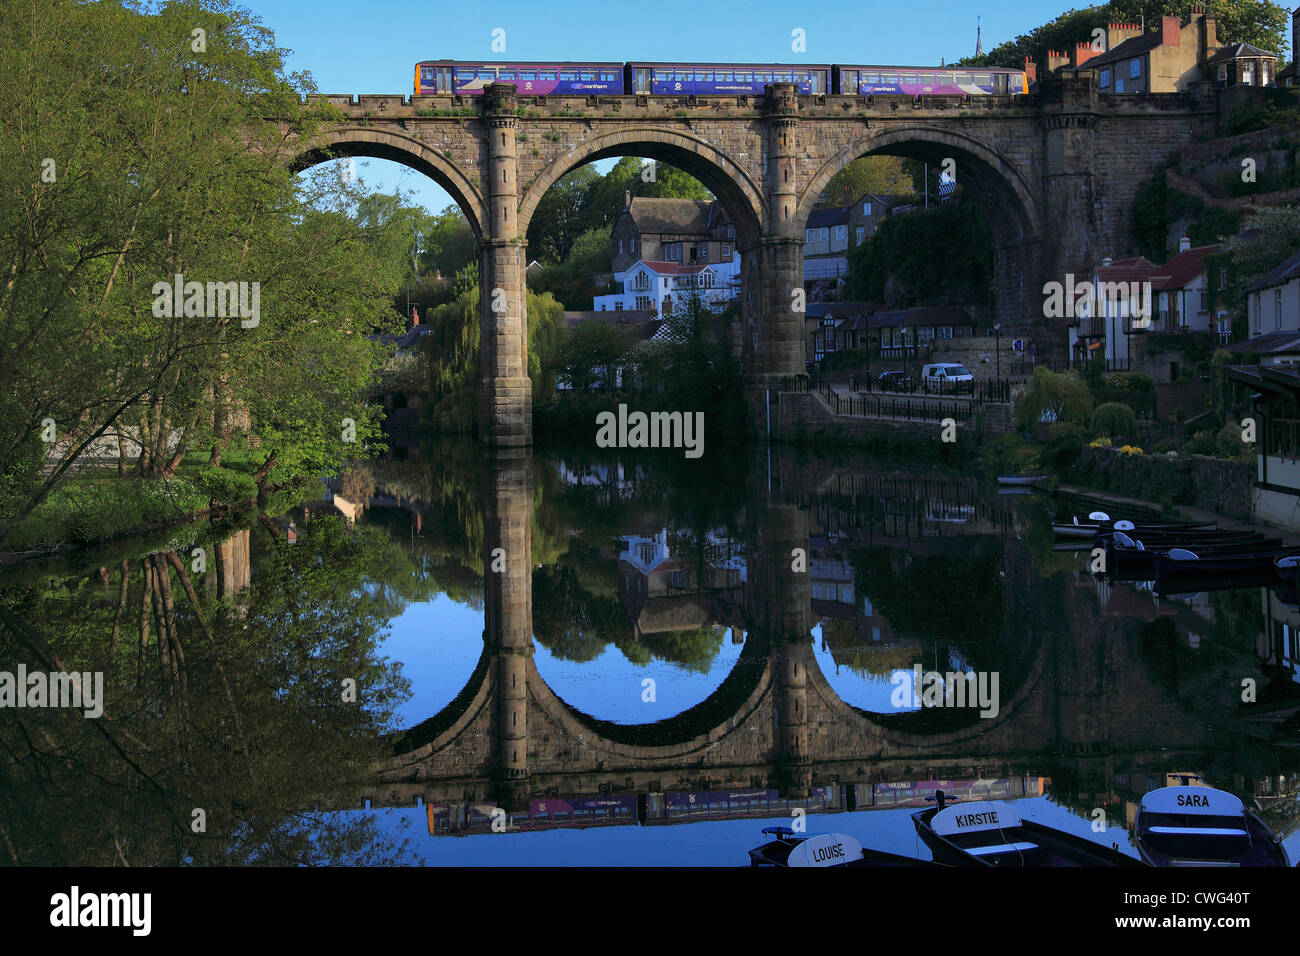 Northern Trains Diesel unit crossing over the Viaduct, river Nidd, Knaresborough town, Yorkshire Dales, England, UK Stock Photo